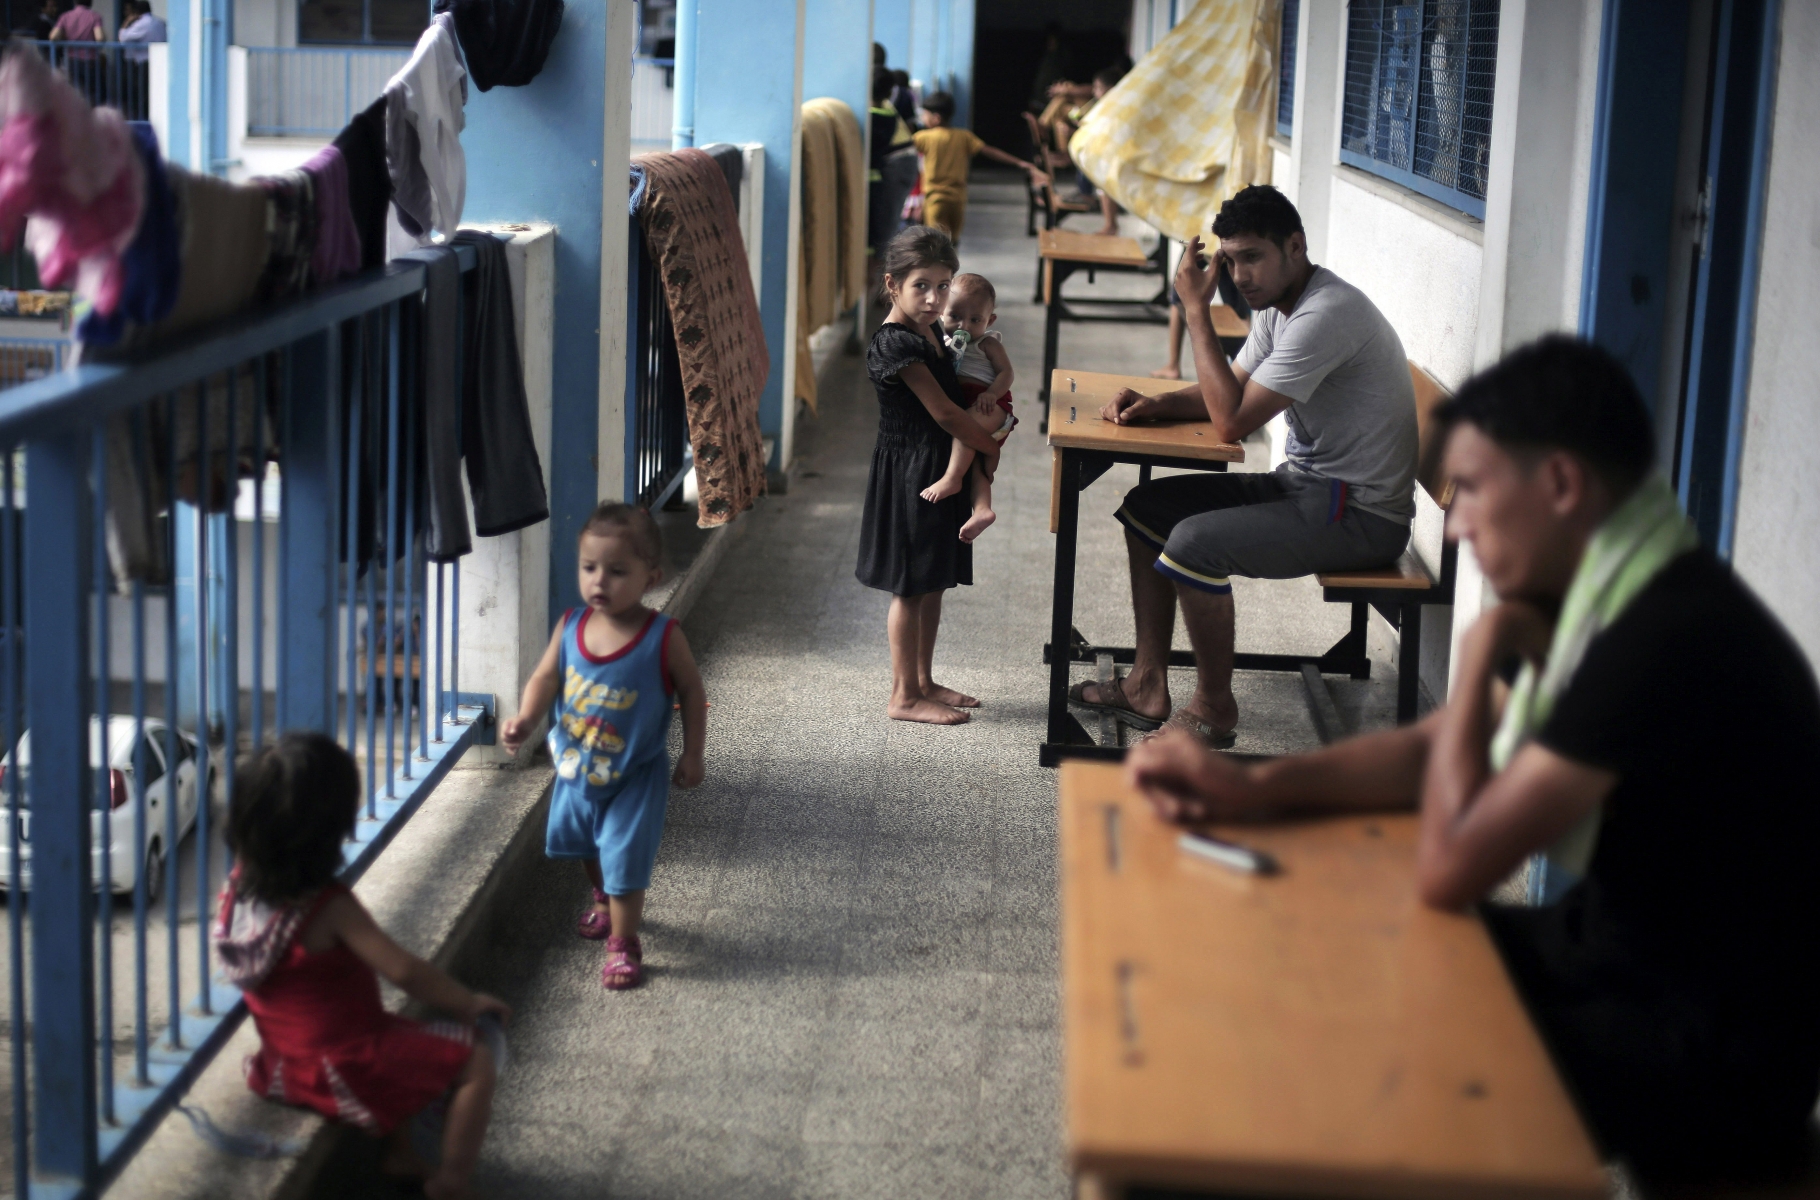 In this Wednesday, Sept. 3, 2014 photo, Palestinians sit outside the classrooms in a U.N. school where families live after their house was destroyed by Israeli strikes, in Gaza City. With nearly 100,000 Palestinians in Gaza having no home to go back to, the U.N.-run schools are still housing thousands just one week before the school year is scheduled to begin, posing a challenge to authorities. (AP Photo/Khalil Hamra)